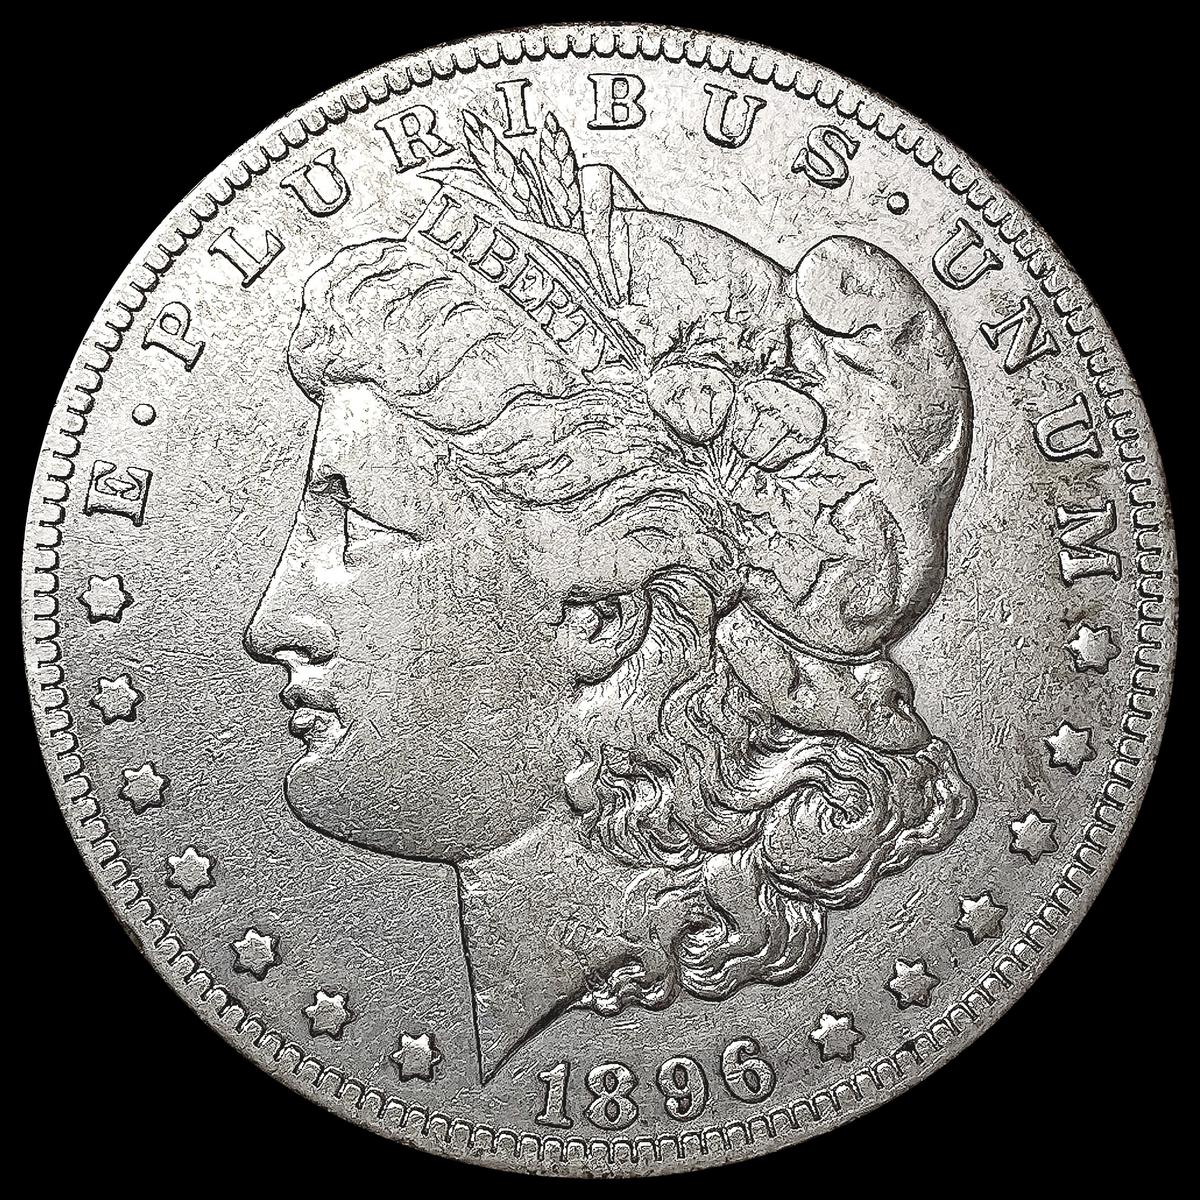 1896-S Morgan Silver Dollar ABOUT UNCIRCULATED